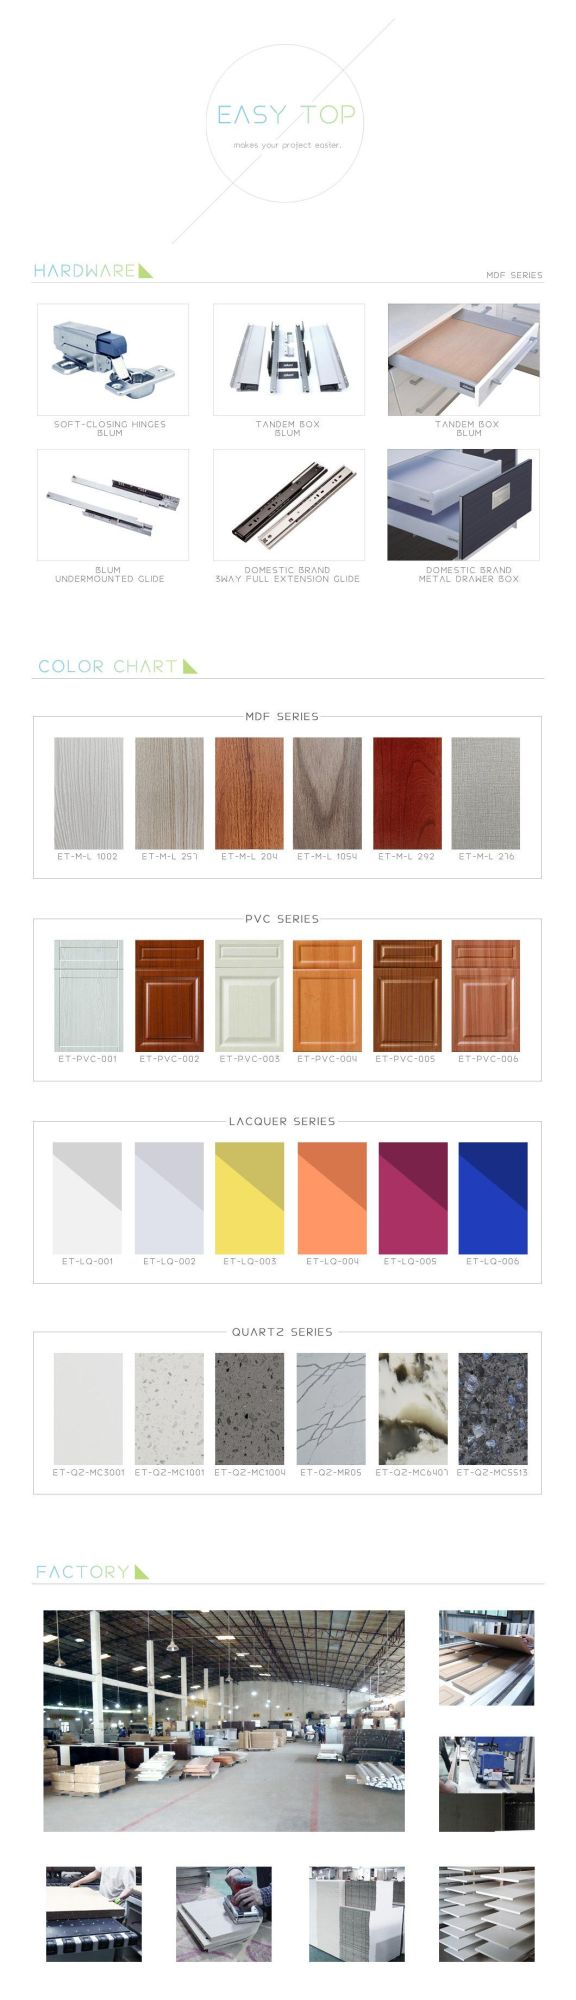 Custom Made Size and Color Custom Designs Modern Kitchen Cabinet Manufacturer for The Project